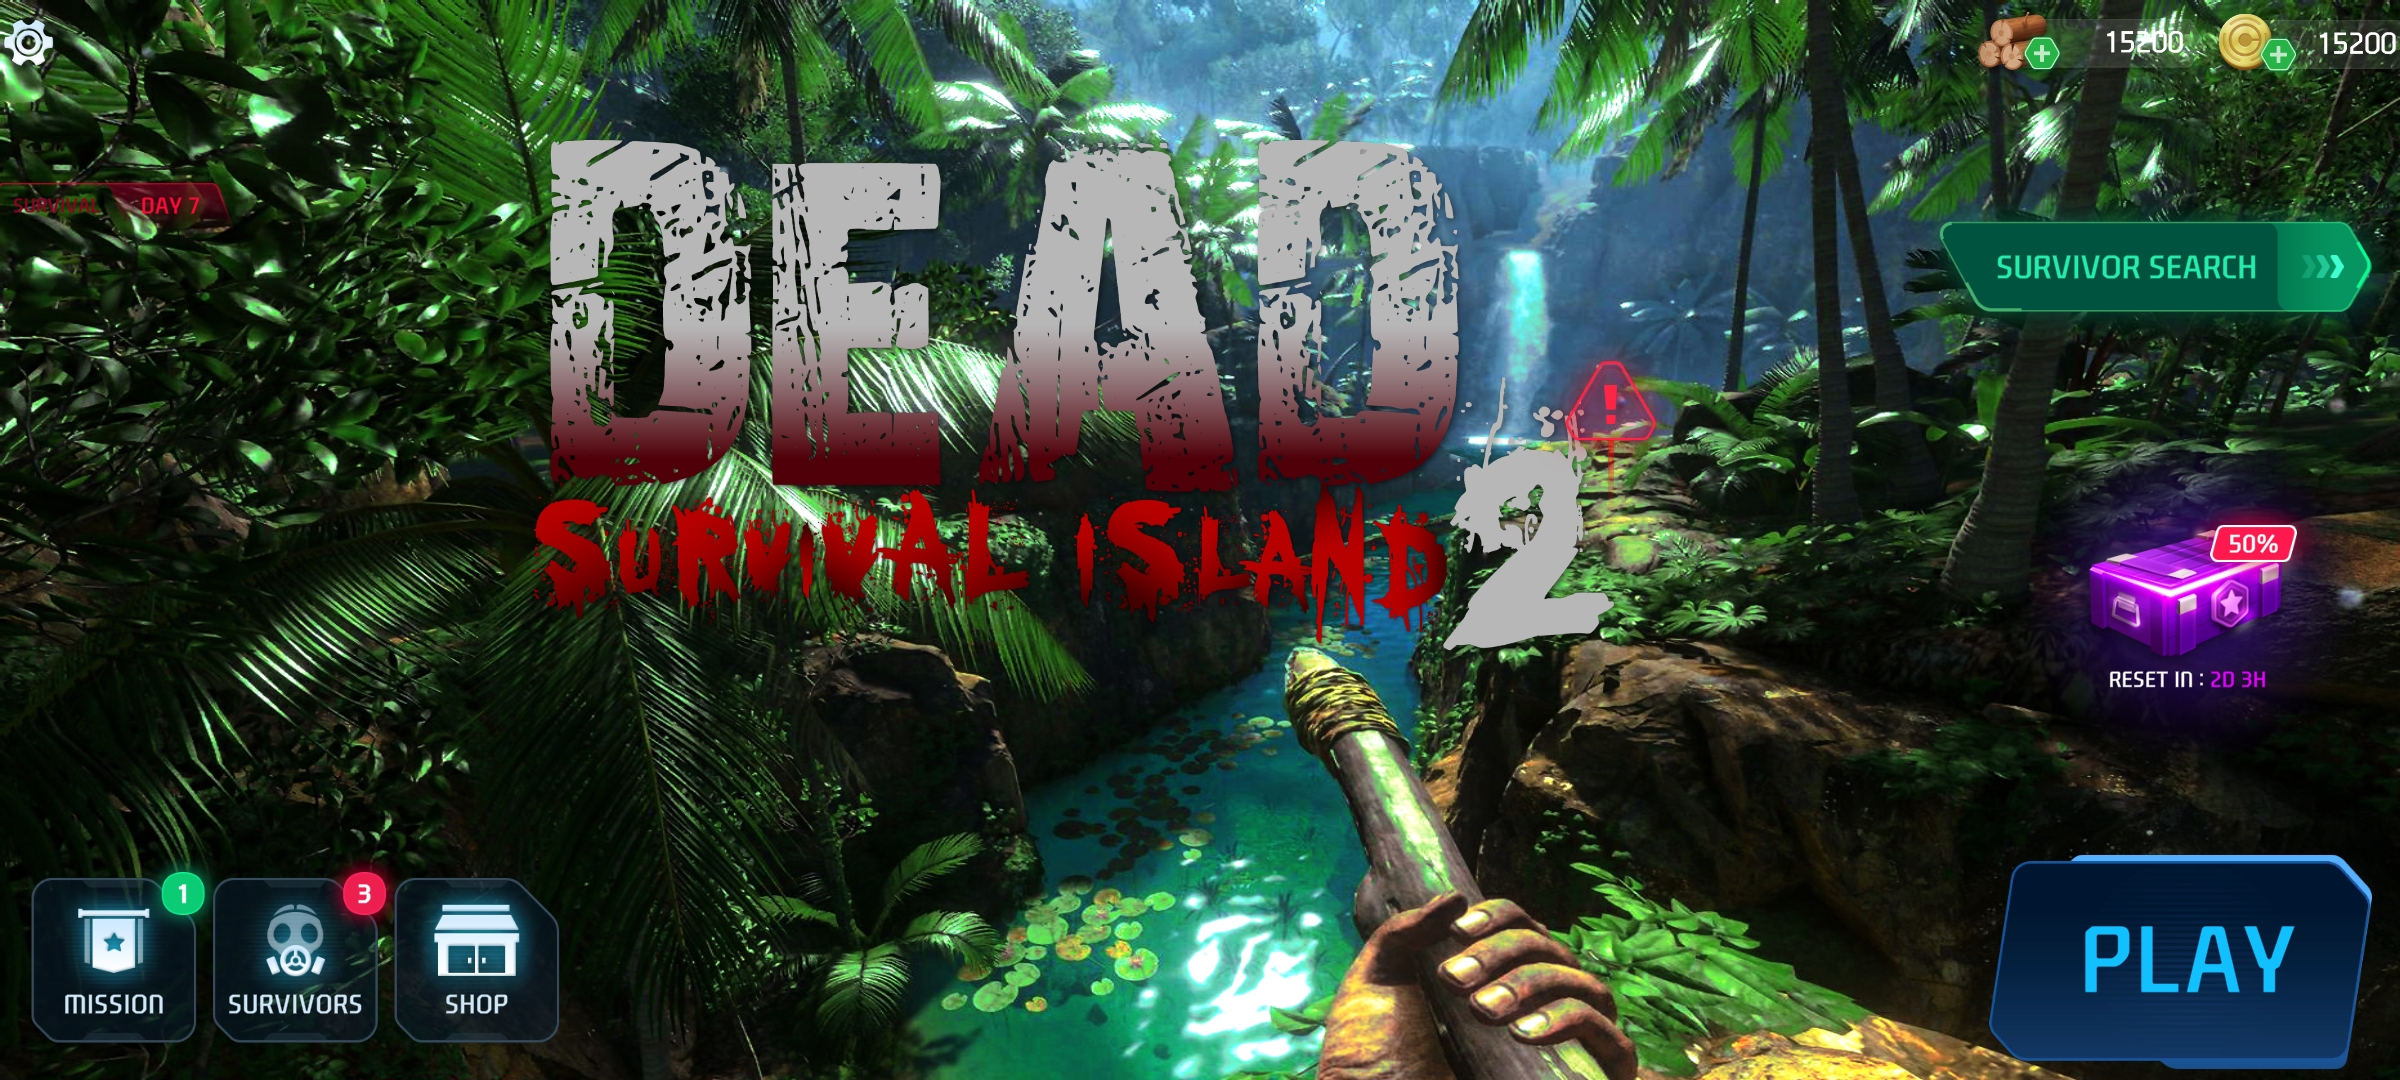 [Game Android] Dead Survival Island 2